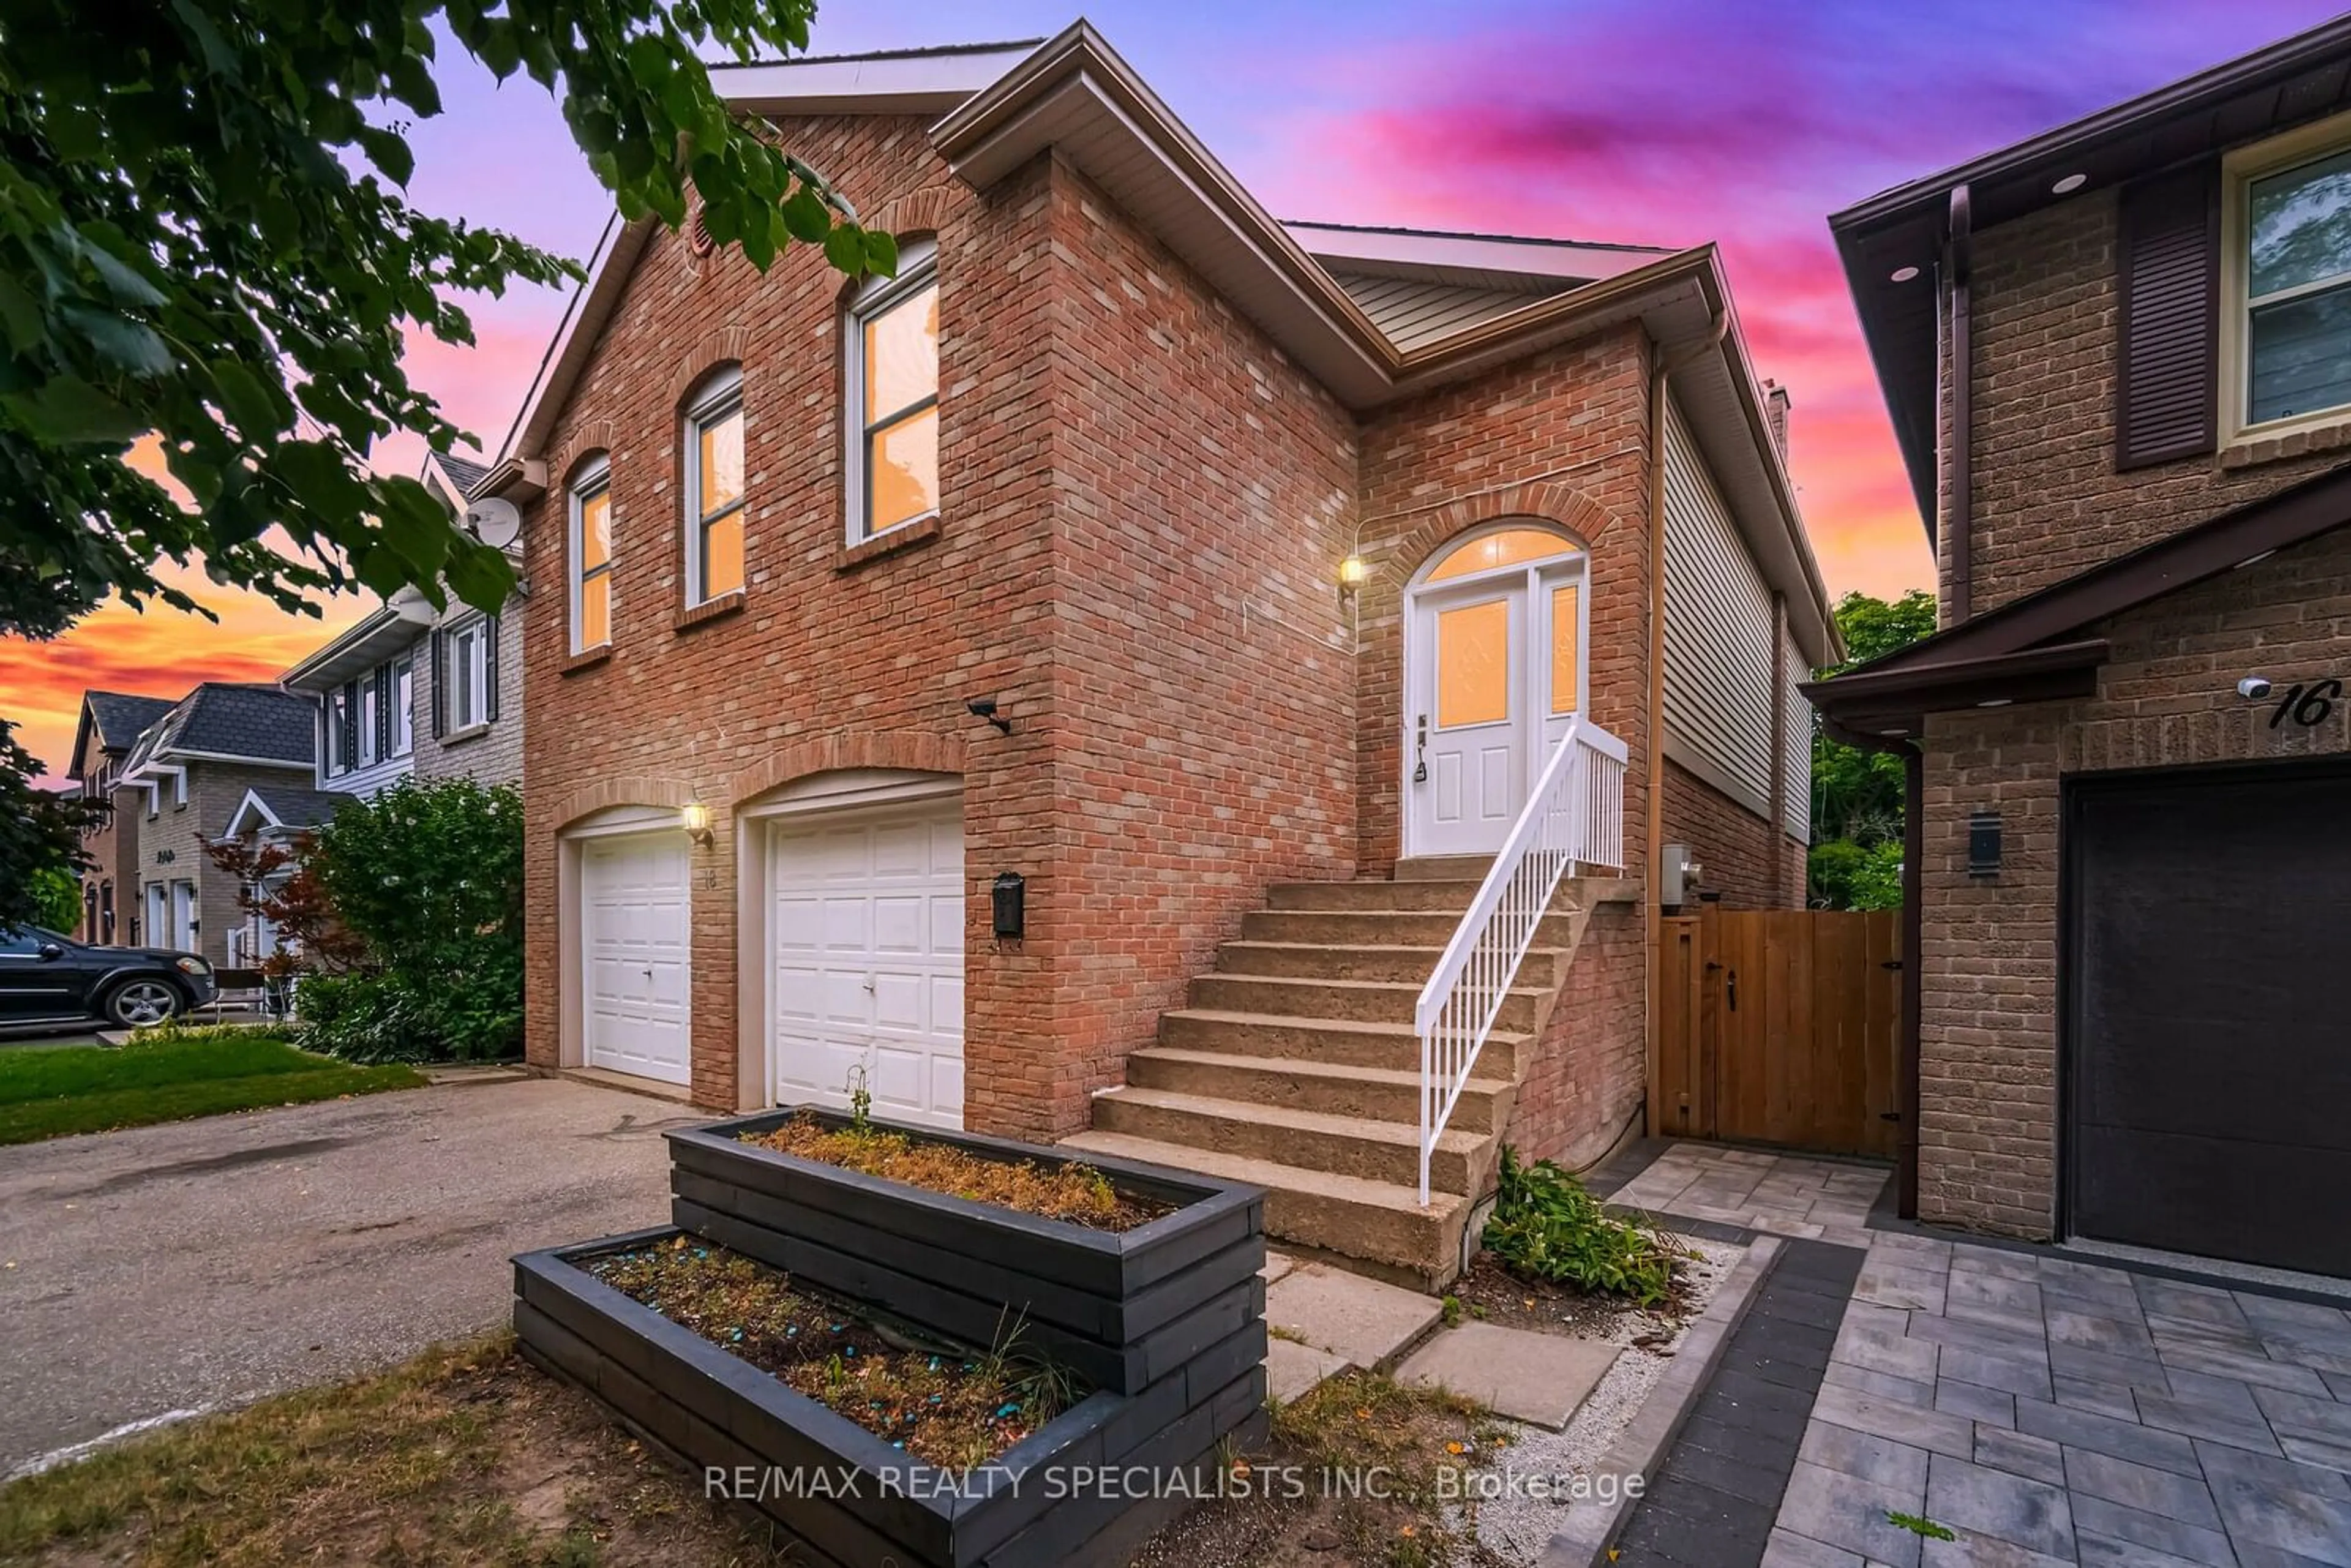 Home with brick exterior material for 18 Ladin Dr, Brampton Ontario L6S 3V5